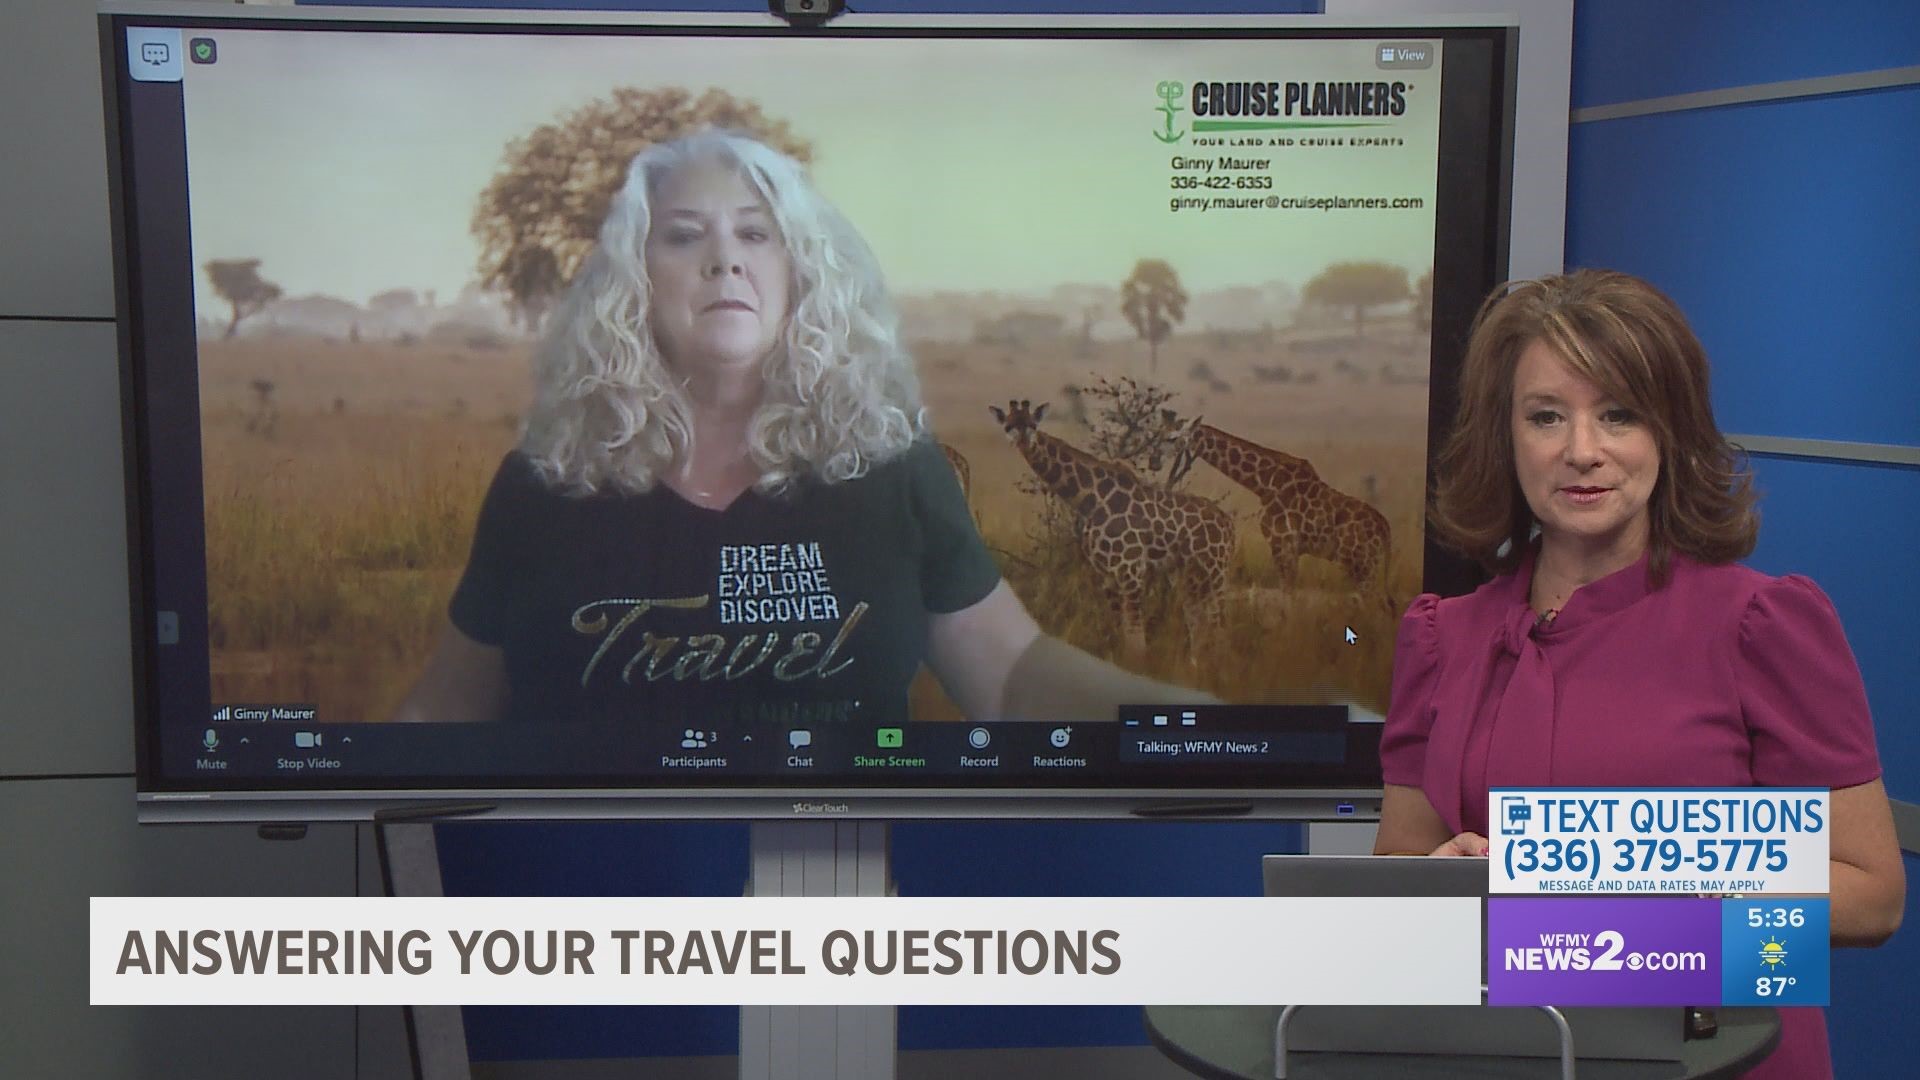 Ginny Maurer with Cruise Planners talks the new travel trends impacting the industry during the pandemic.